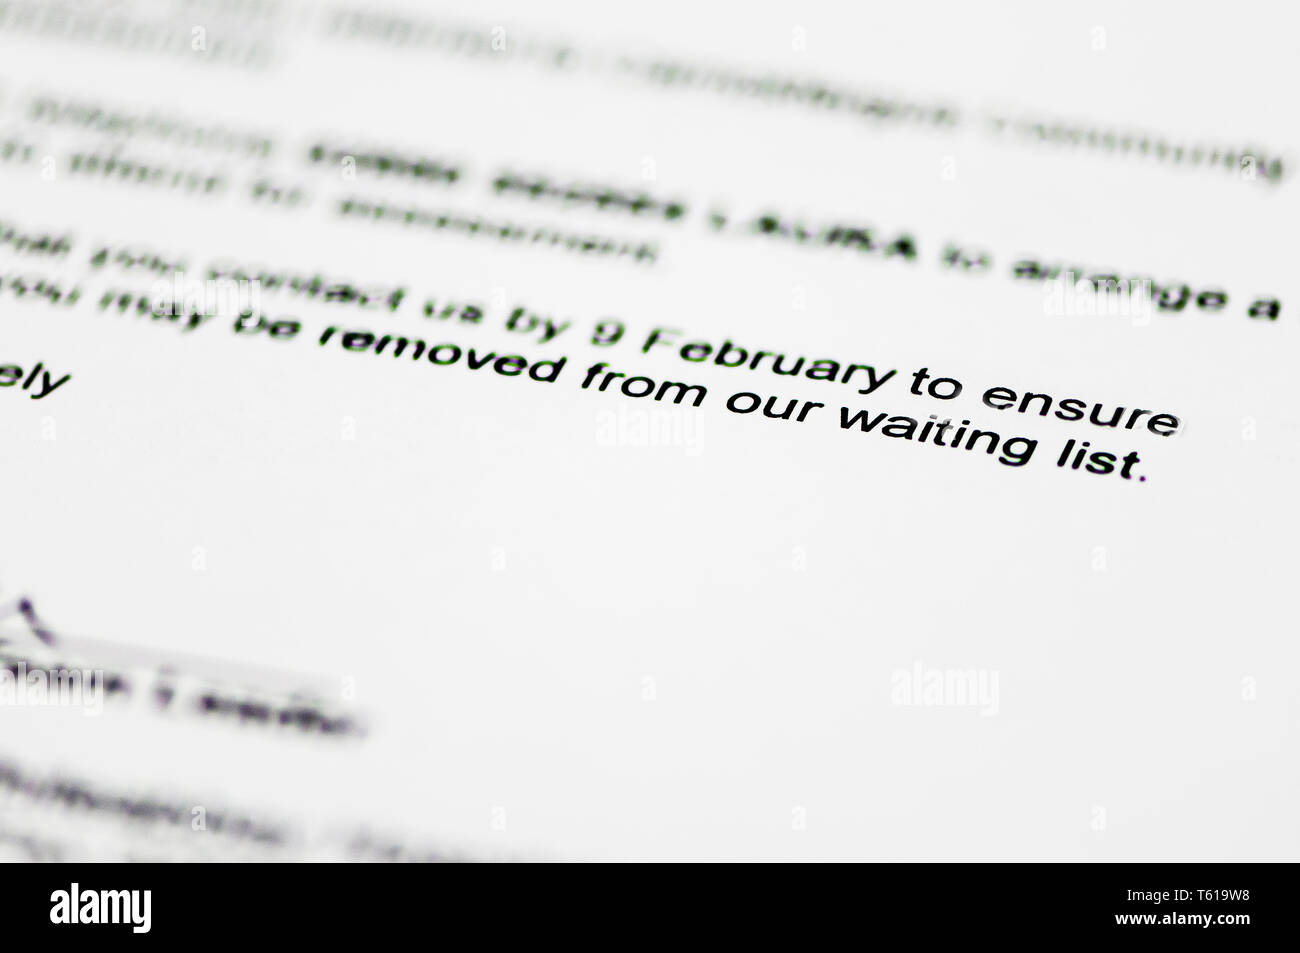 Hospital referral letter warning patient that they could be removed from the waiting list. Stock Photo